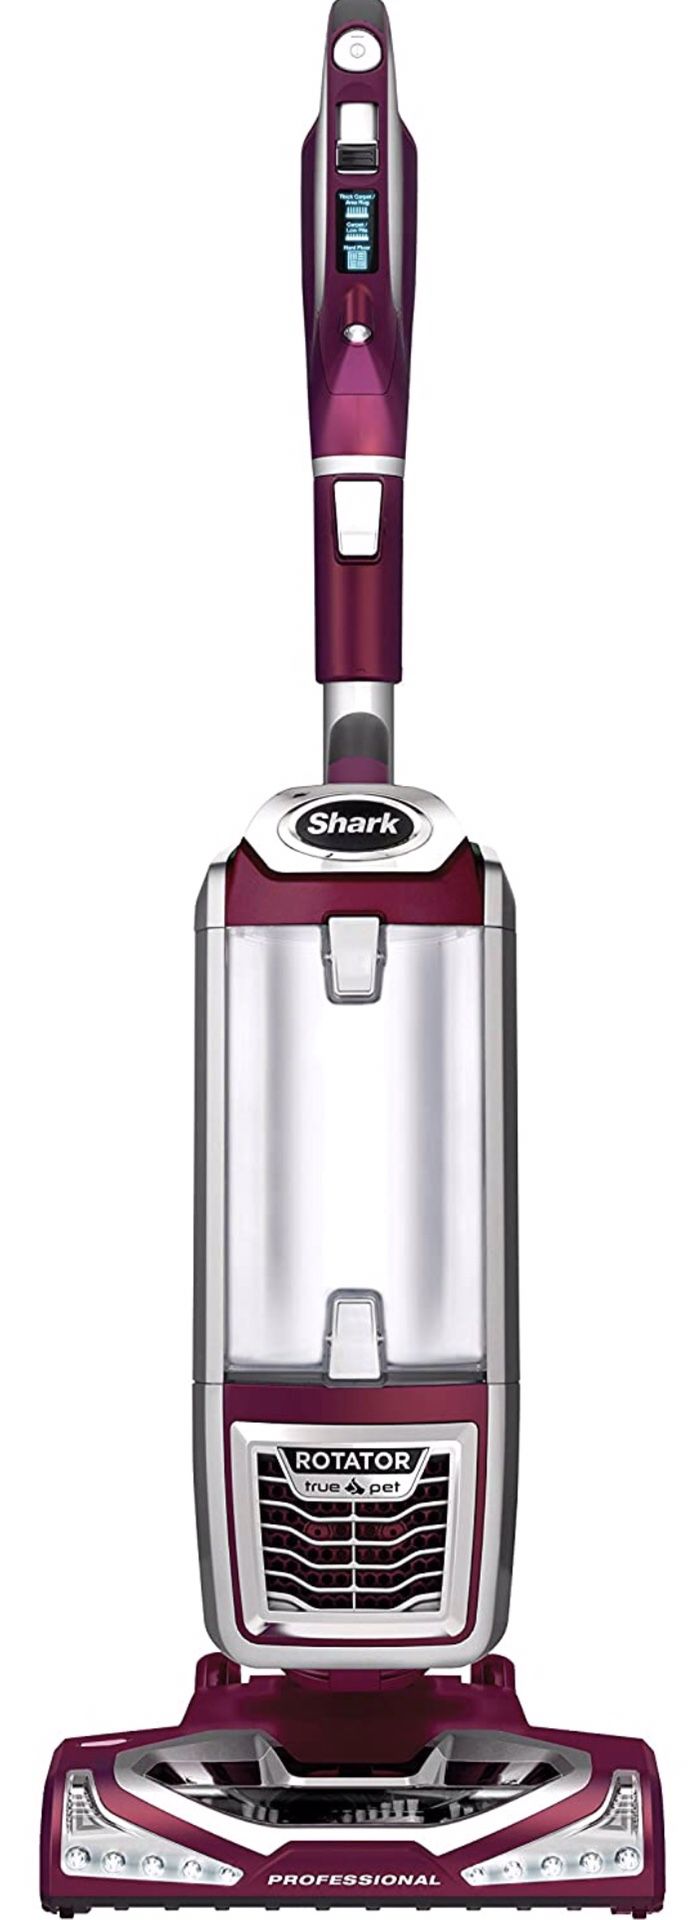 Shark NV752 Rotator Powered Lift-Away TruePet Upright Vacuum with HEPA Filter, Crevice Tool, Pet Multi-Tool and Power Brush with a Bordeaux Finish, .